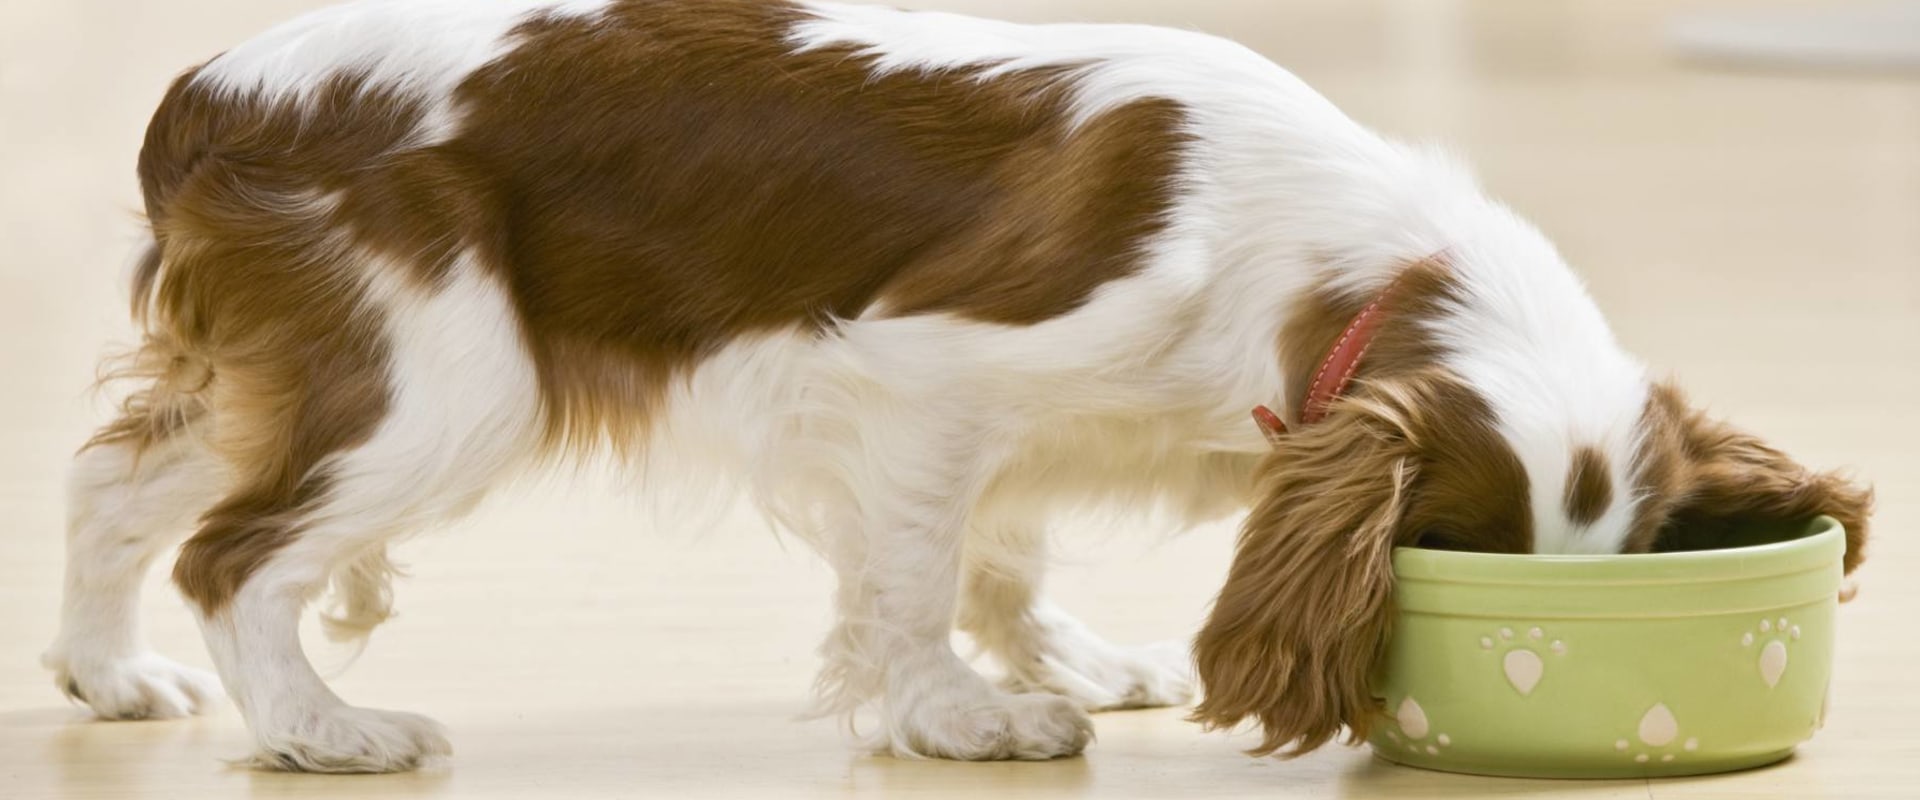 What dog foods should dogs avoid?